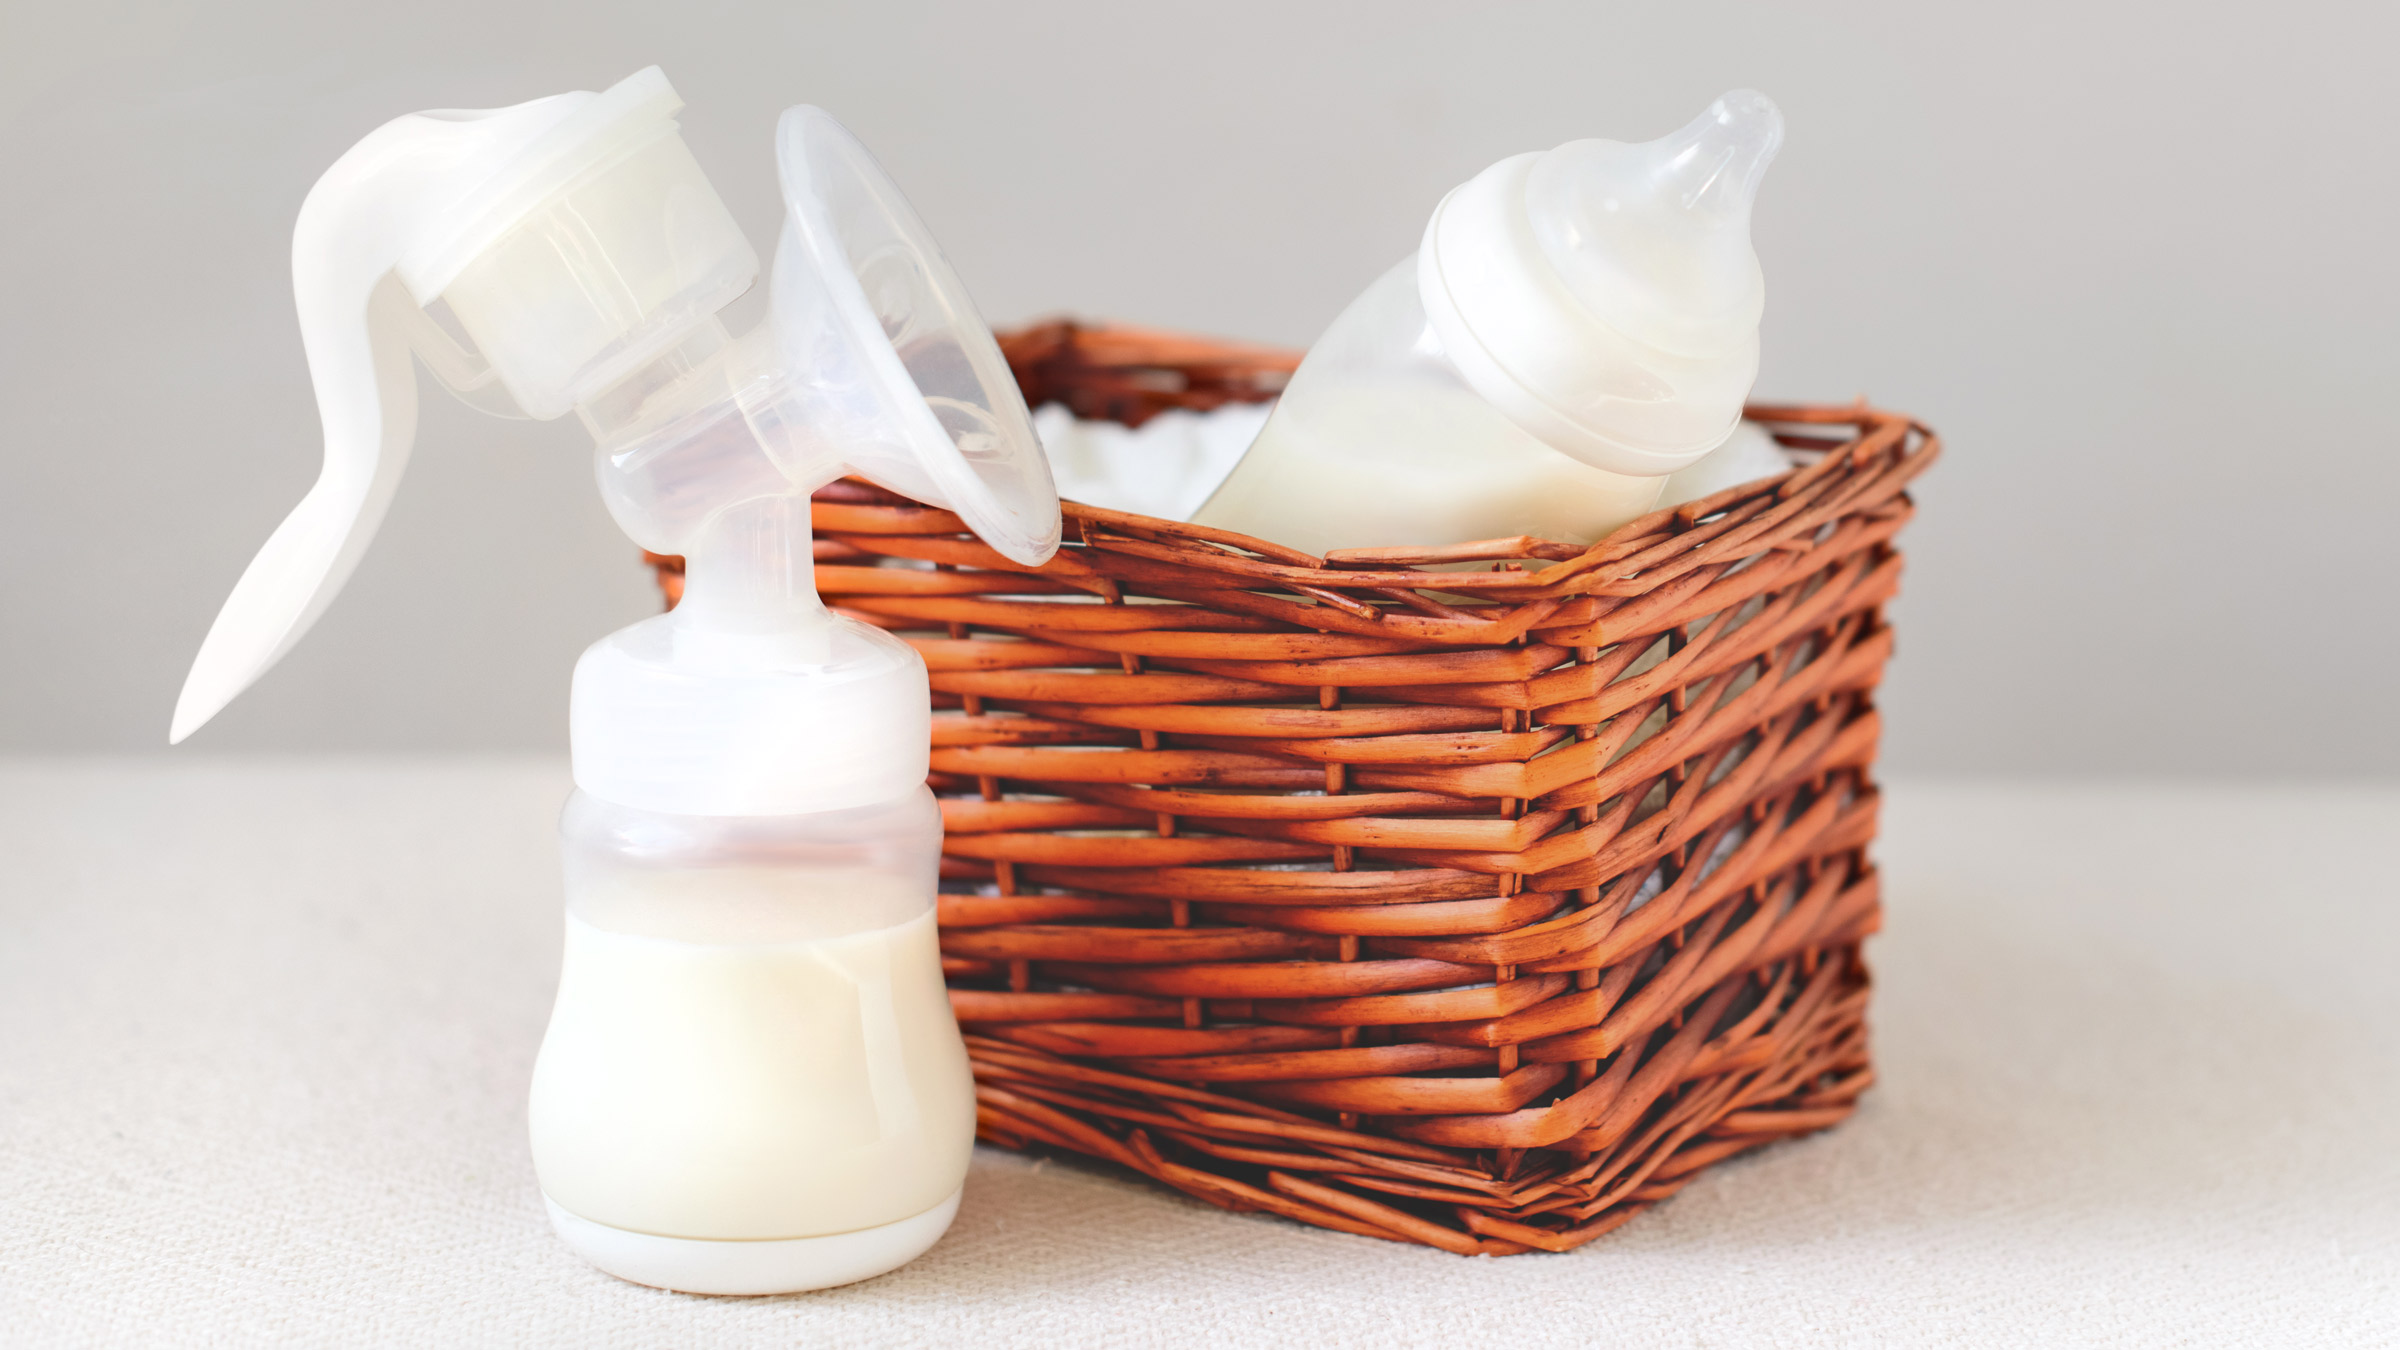 Breastfeeding Essentials for Returning to Work - THE MILK MANUAL